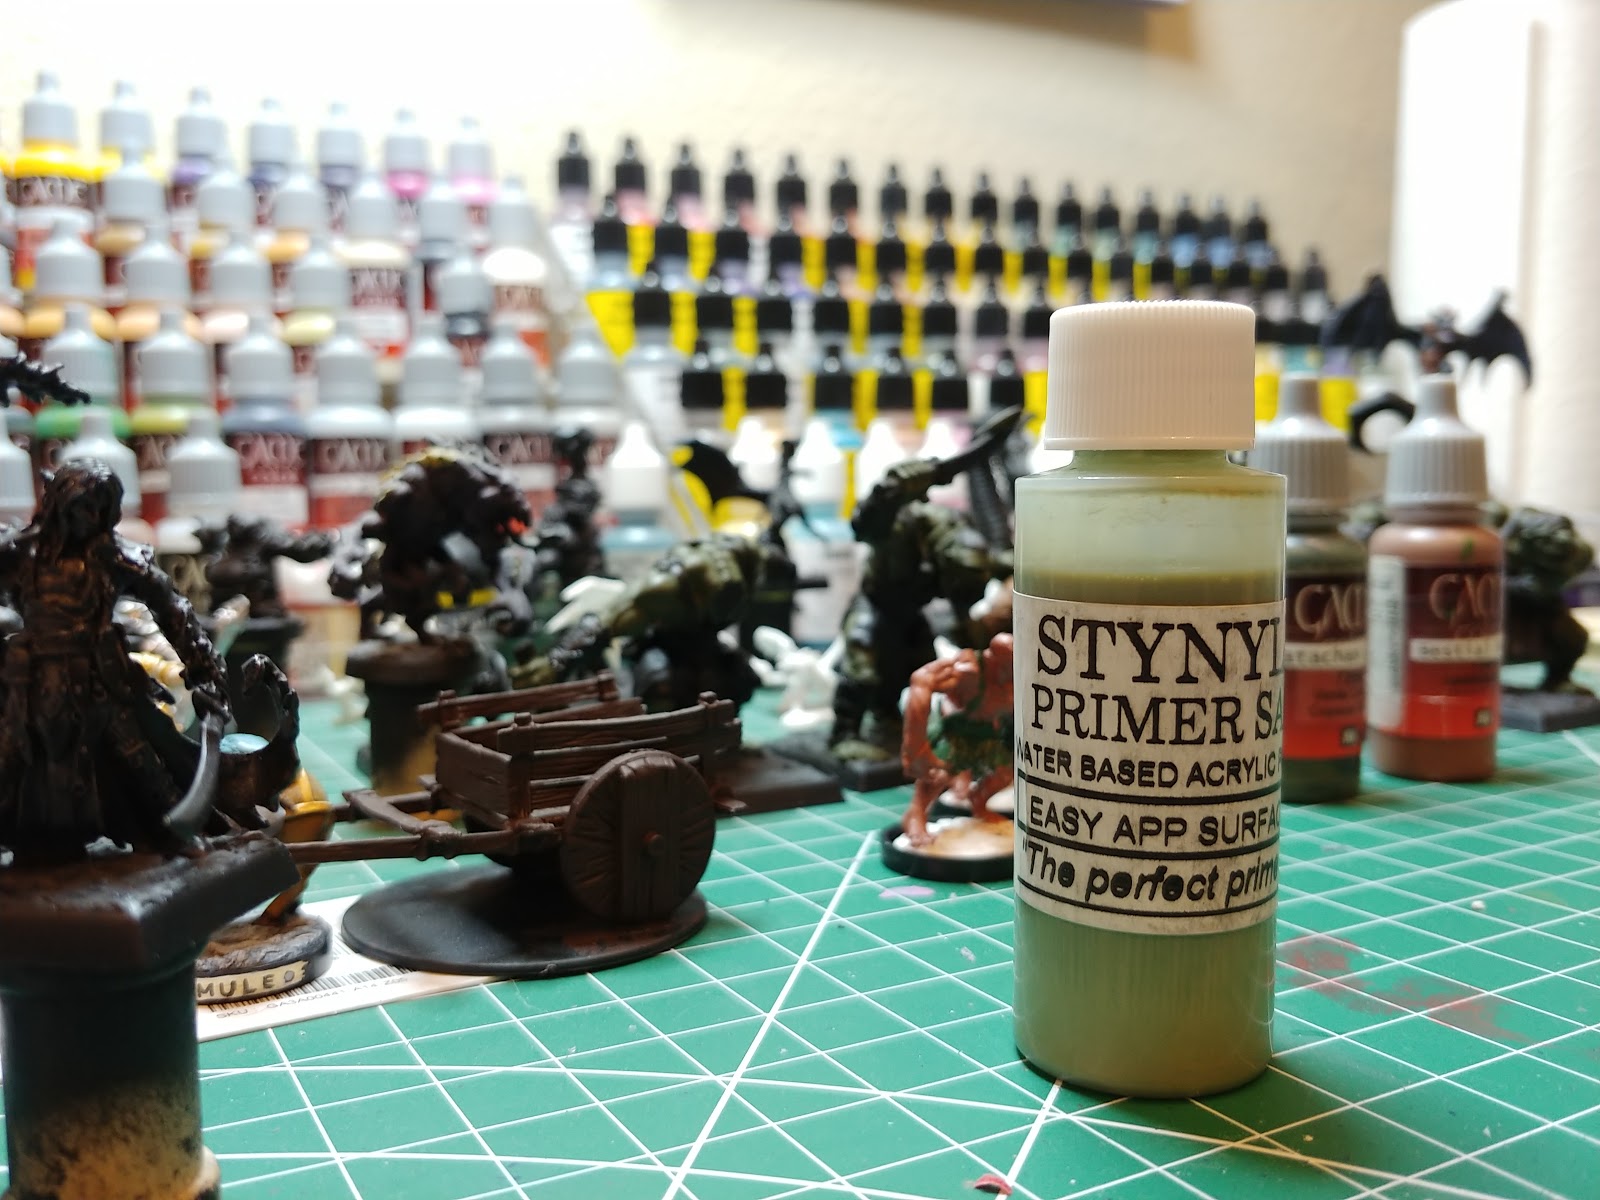 Anyone else having problems with Stynylrez primers recently? :  r/minipainting